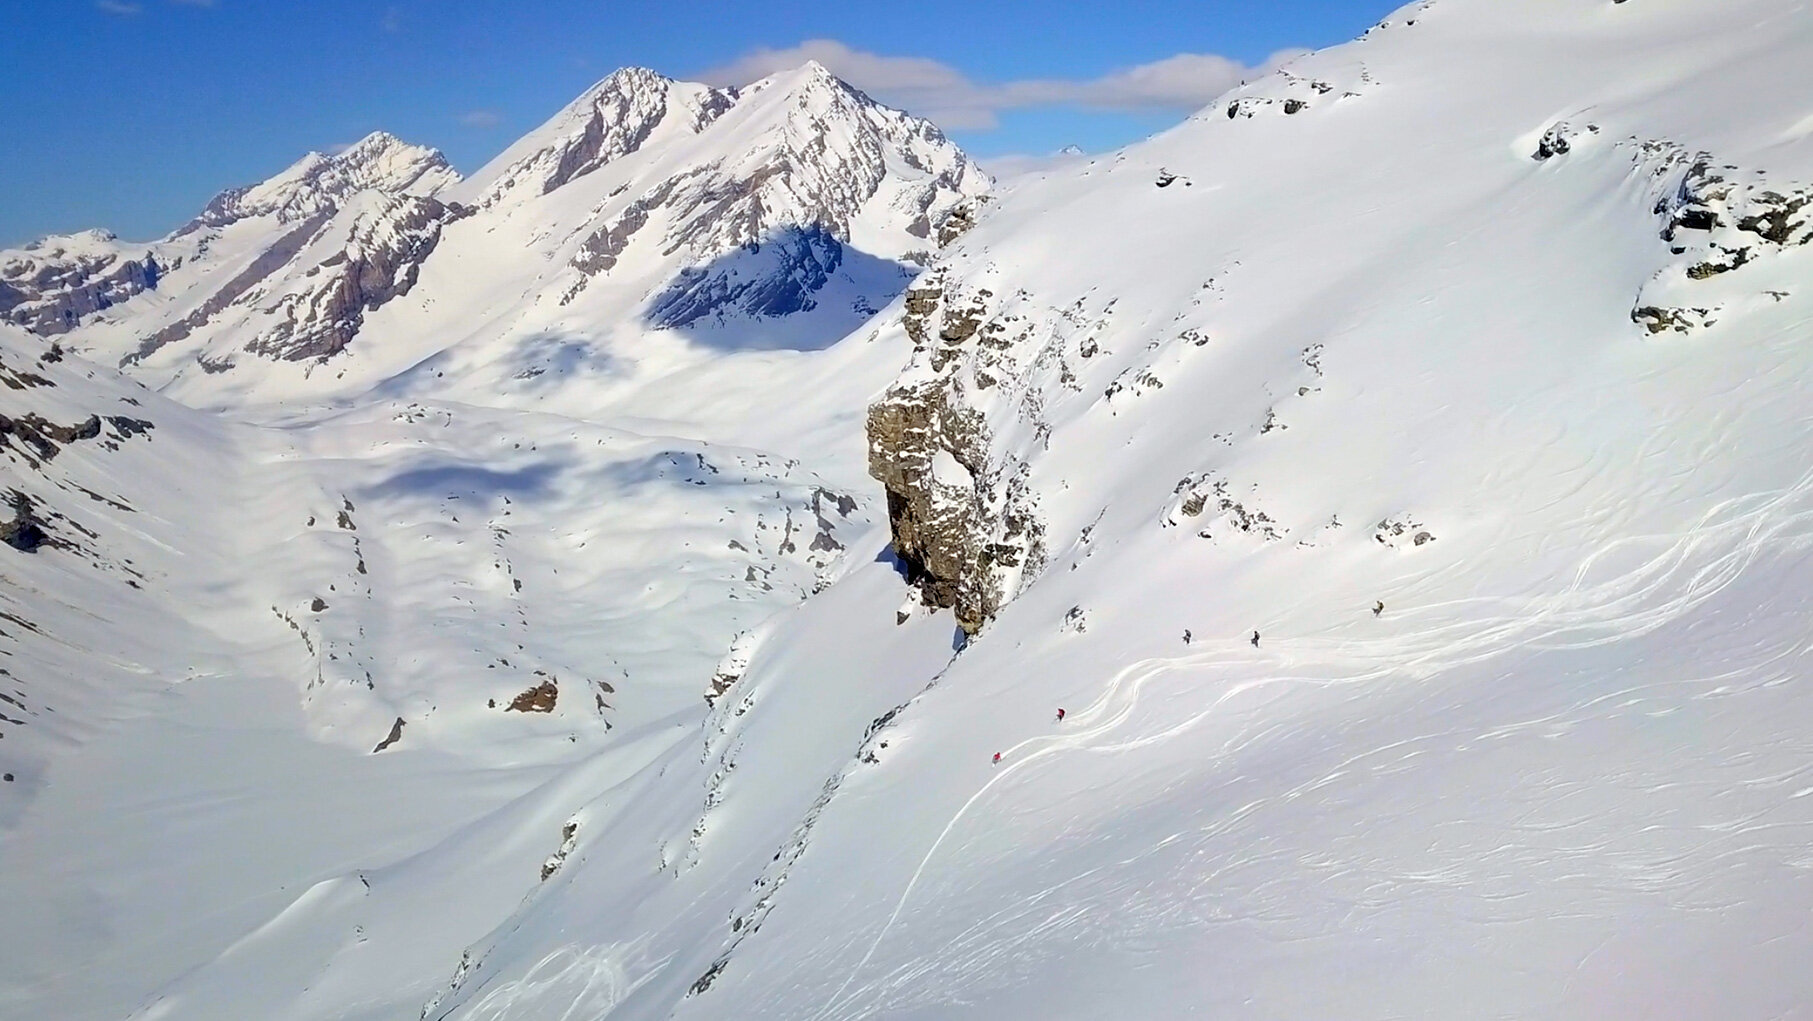 Skiing while on a shoot with Arc'teryx in Switzerland